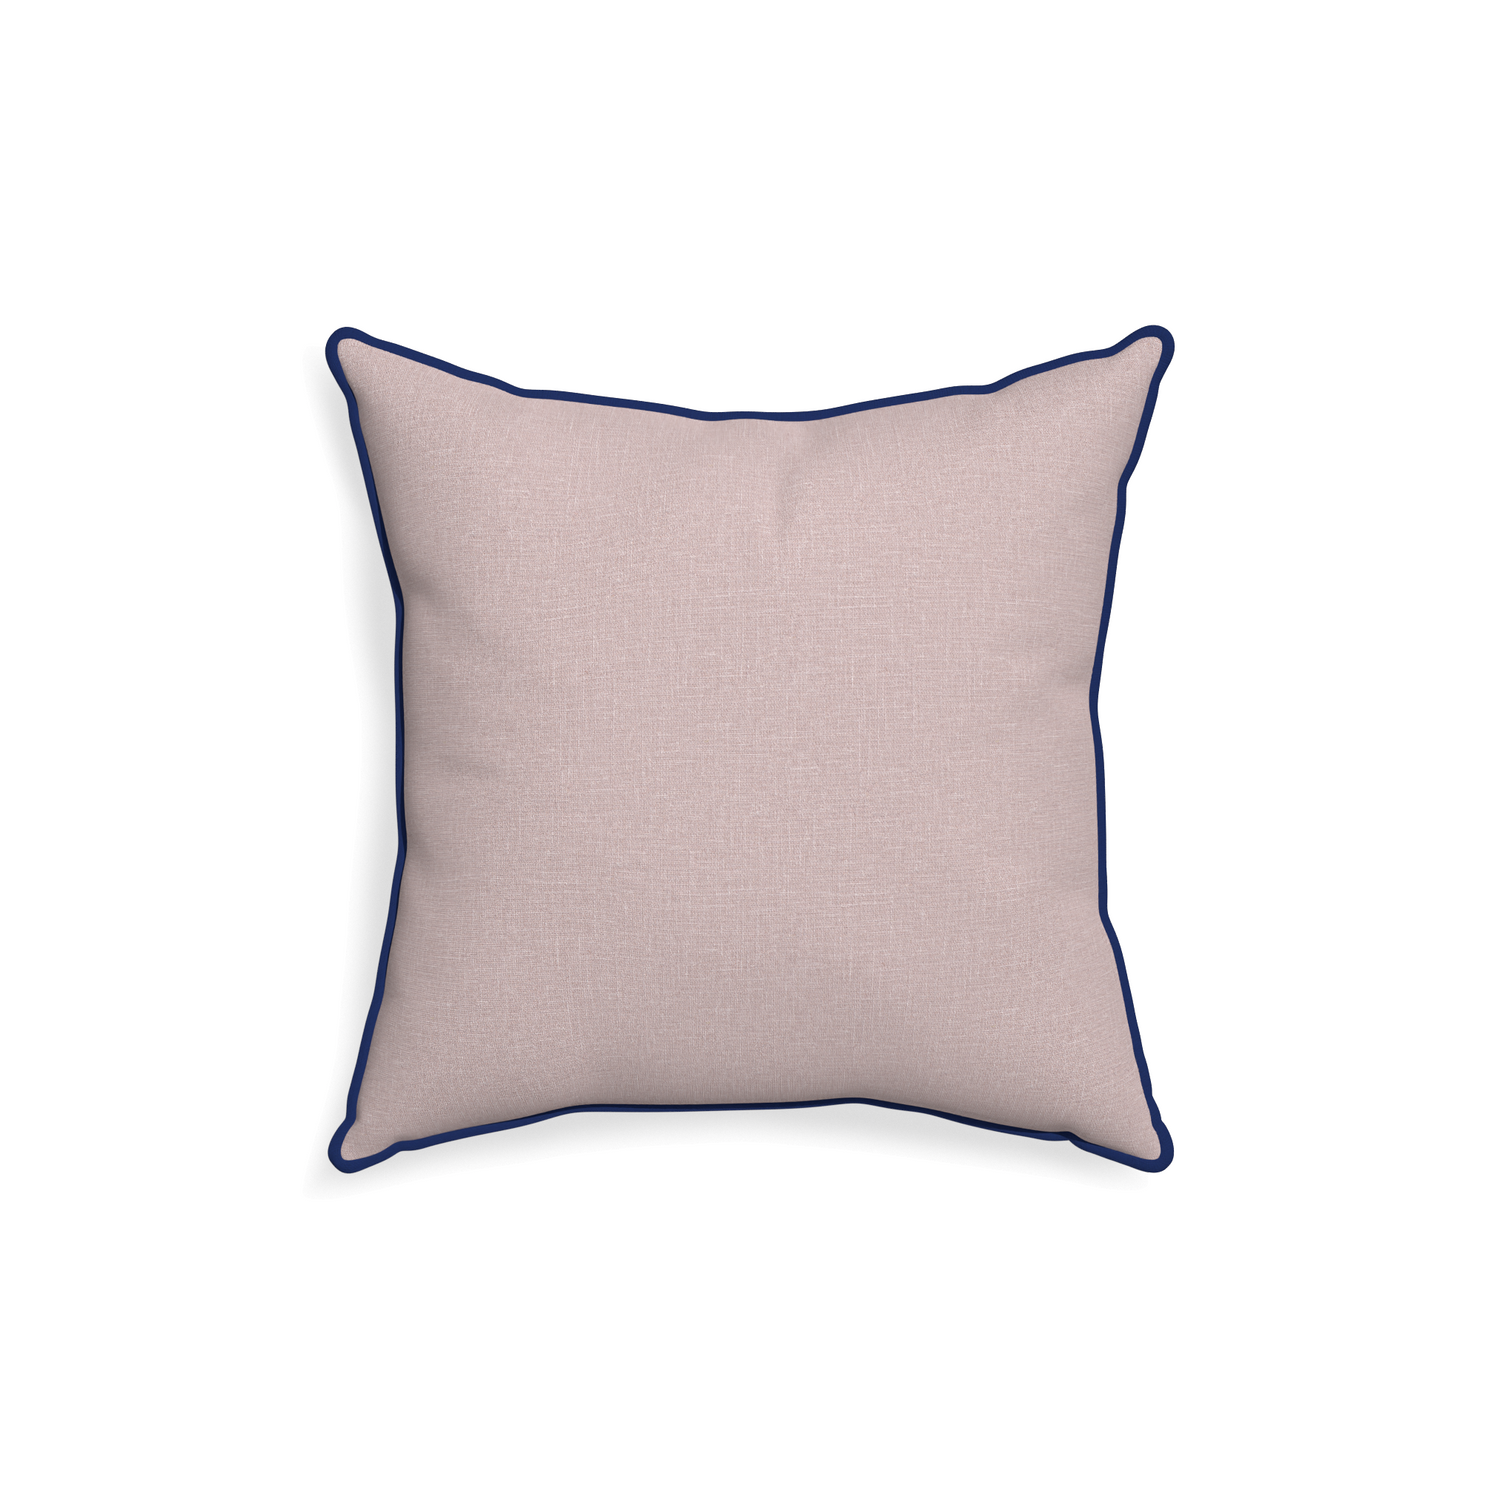 18-square orchid custom mauve pinkpillow with midnight piping on white background